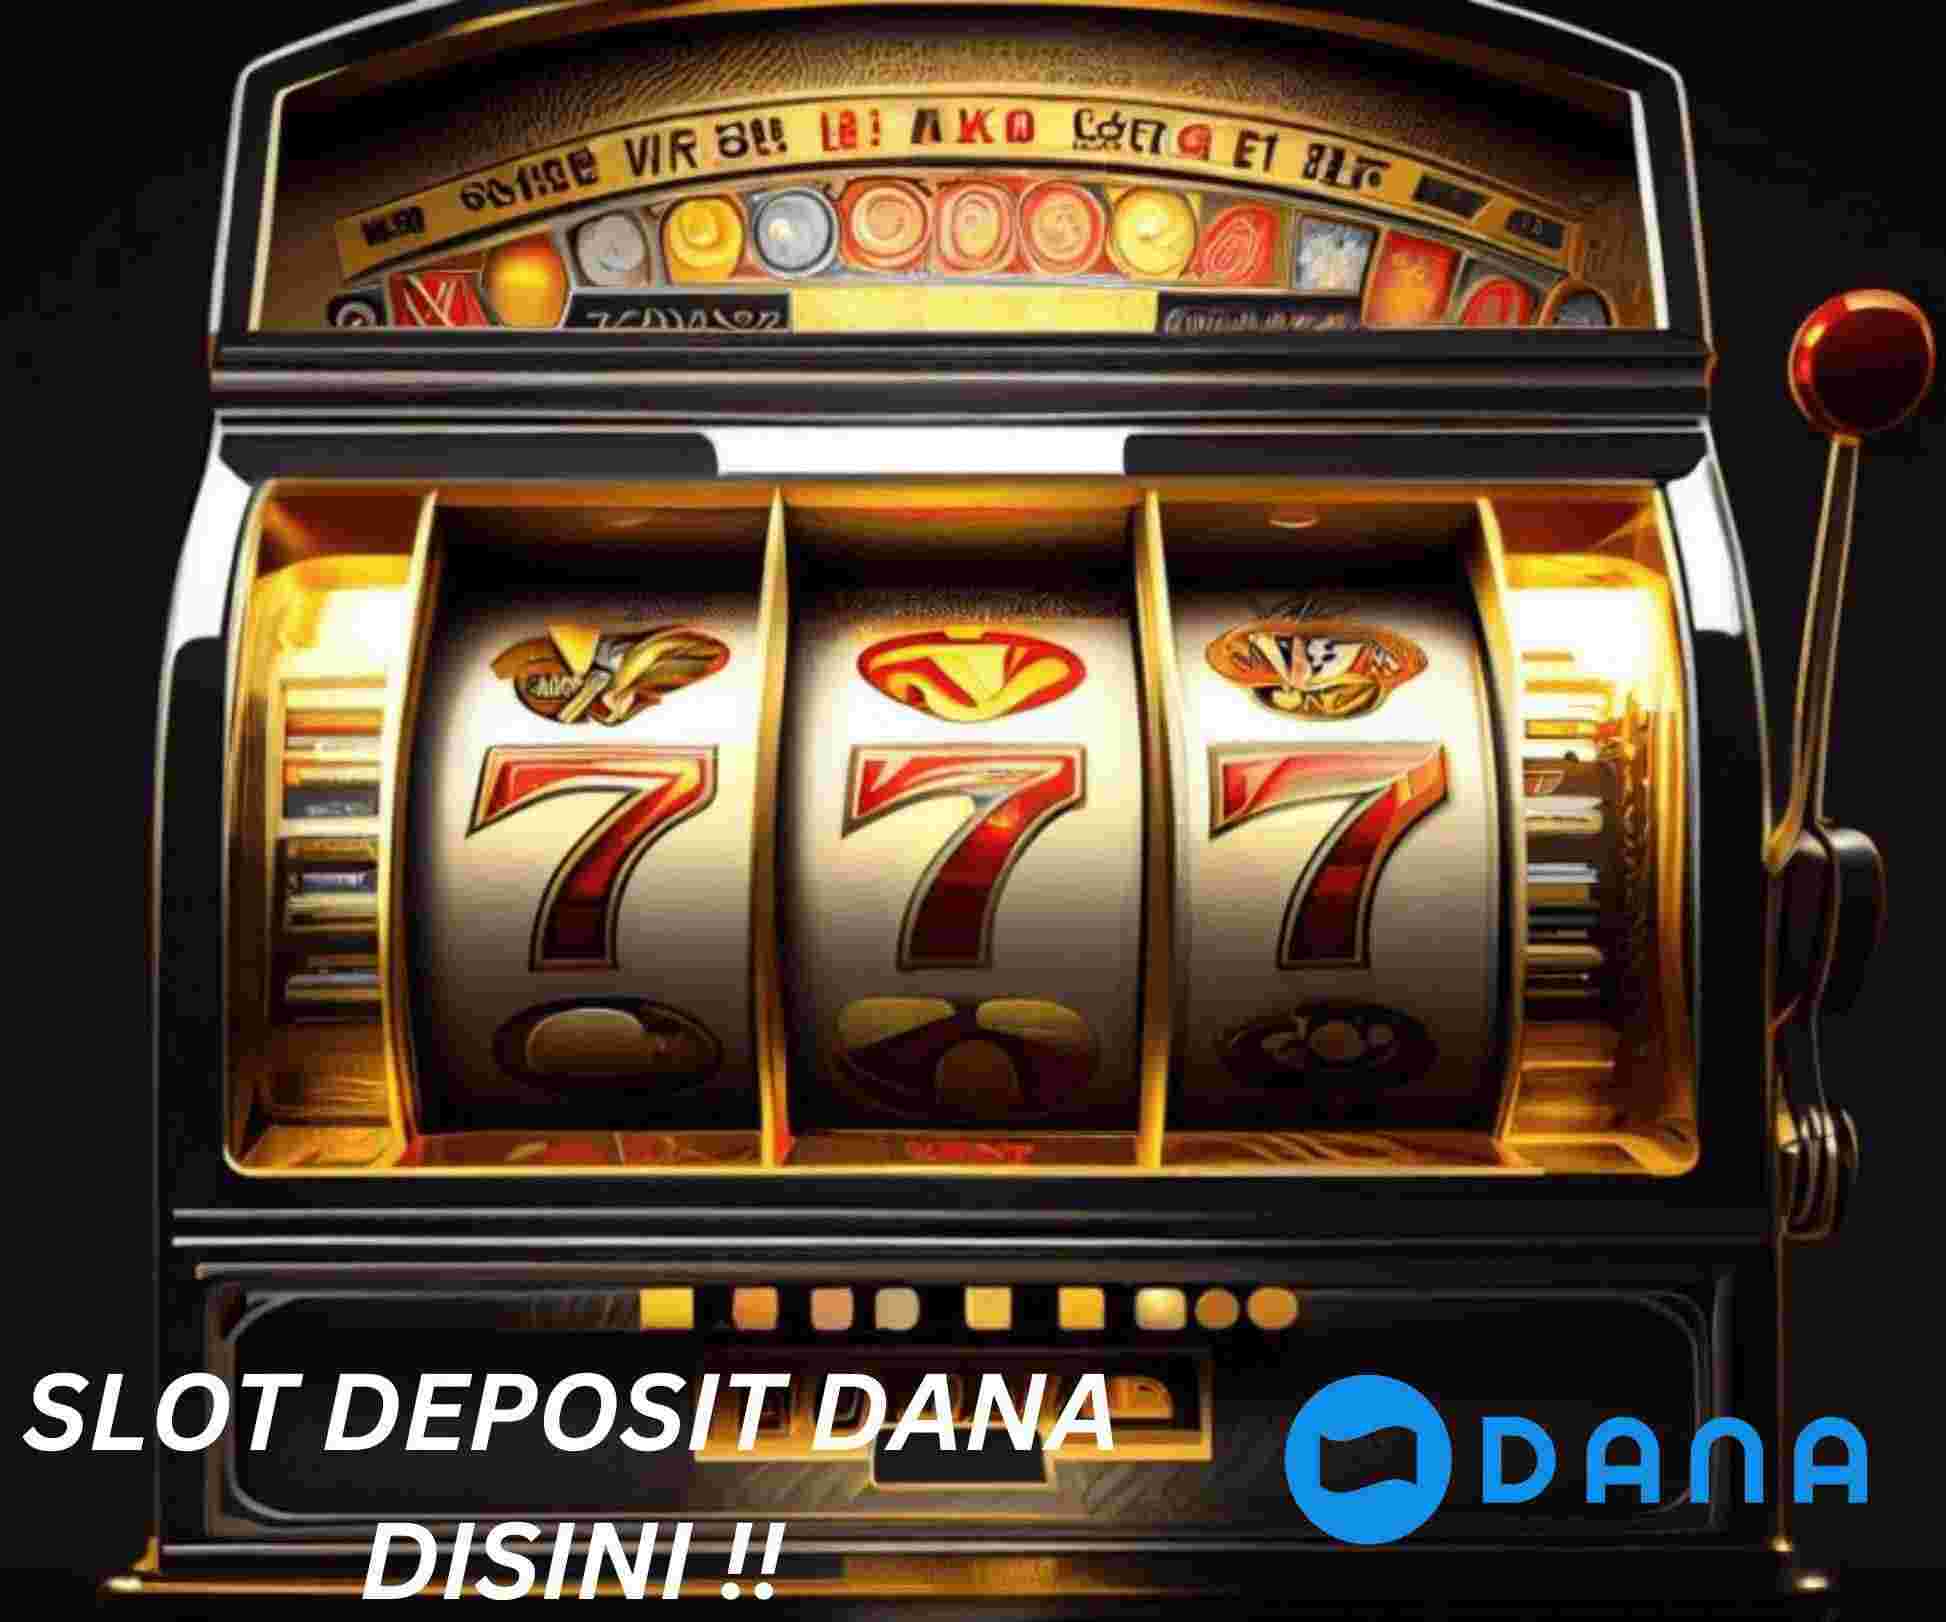 Slot dana is a fun slot game with Indonesia's mainstay dana feature